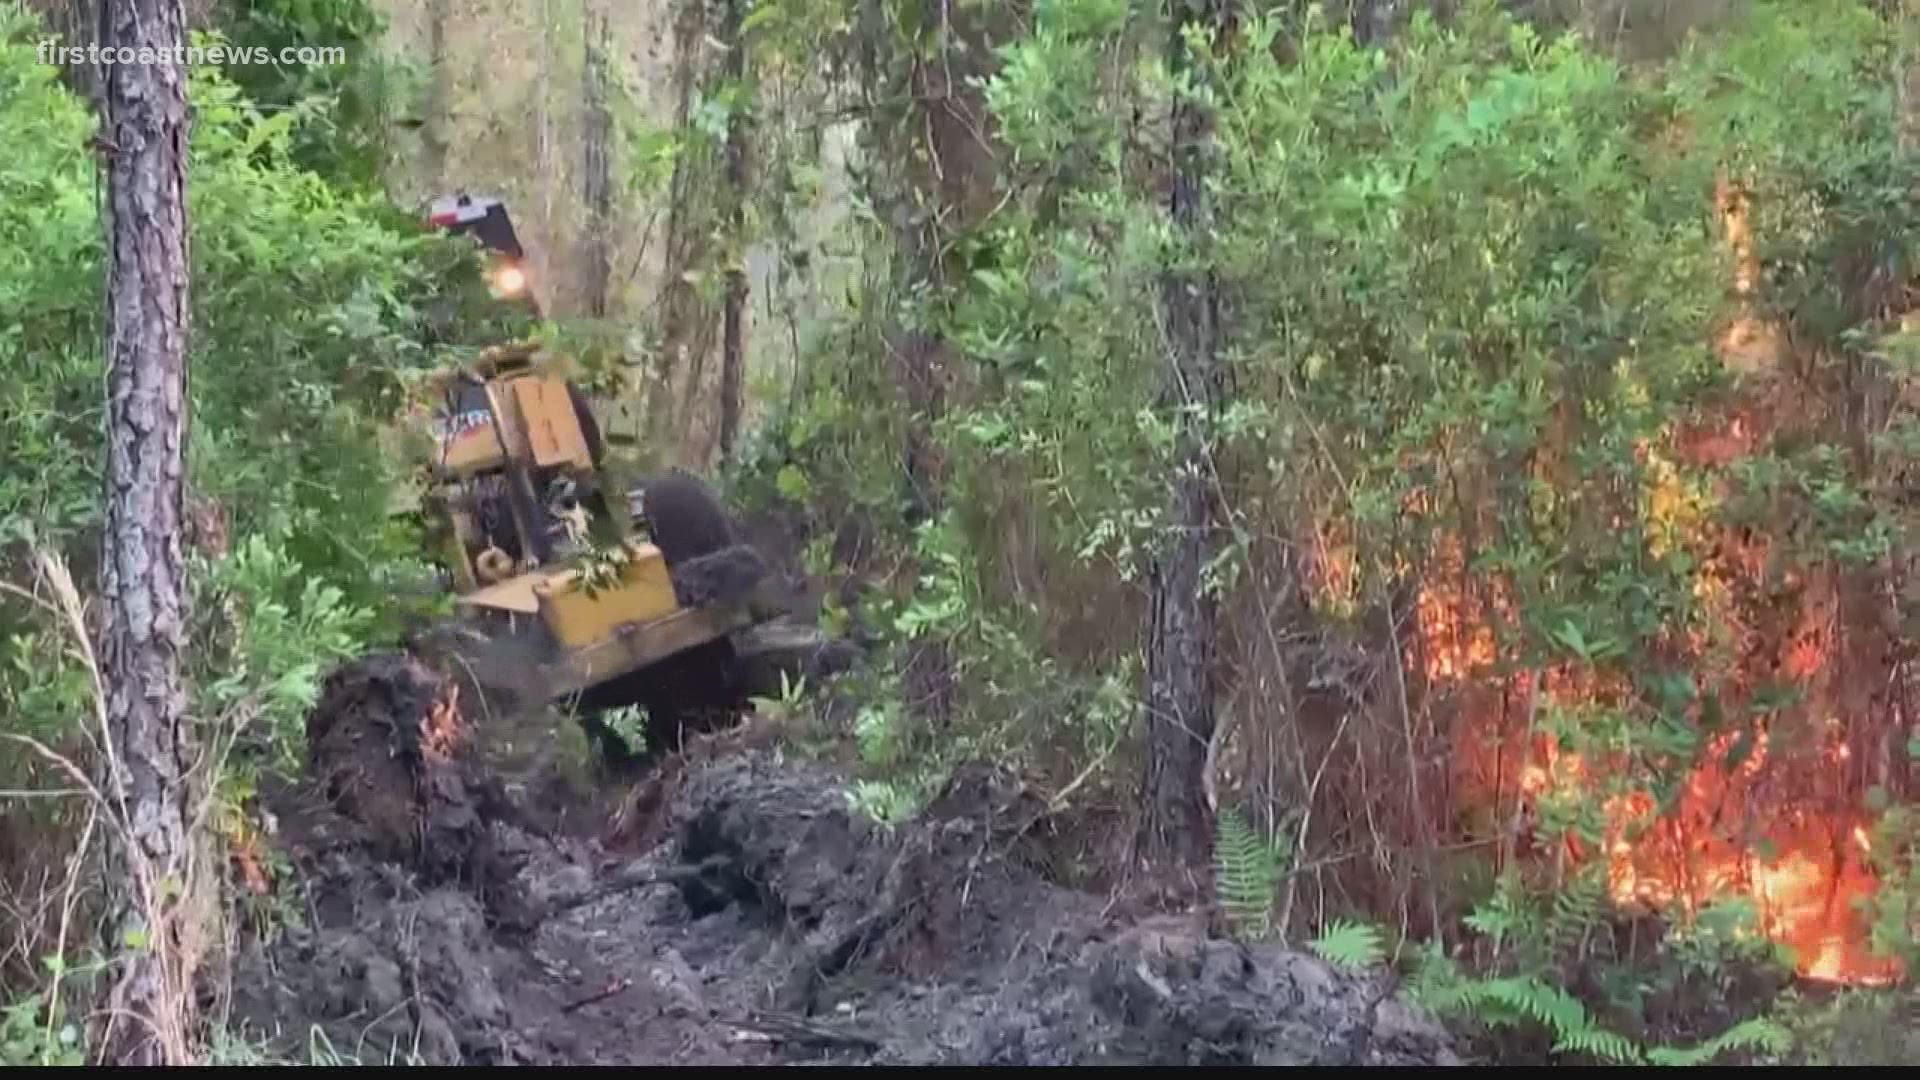 The Florida Forest Service says the wind was not what they expected Monday morning when they began the prescribed burn. Nearly 700 acres have burned.